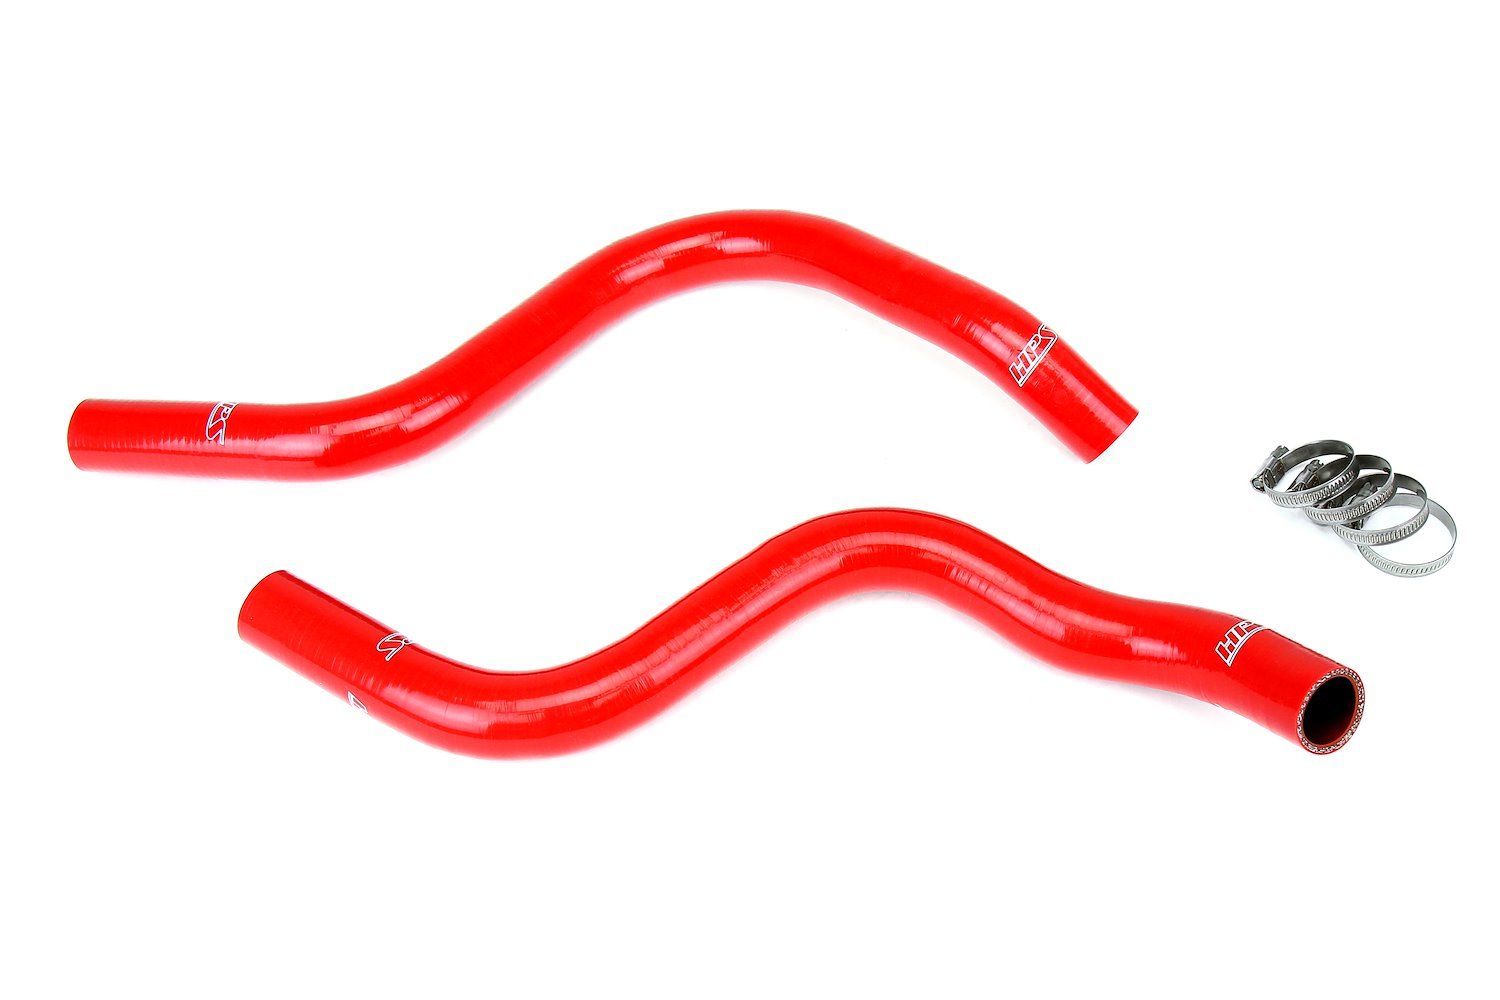 57-1817-RED Radiator Hose Kit, 3-Ply Reinforced Silicone, Replaces Rubber Radiator Coolant Hoses